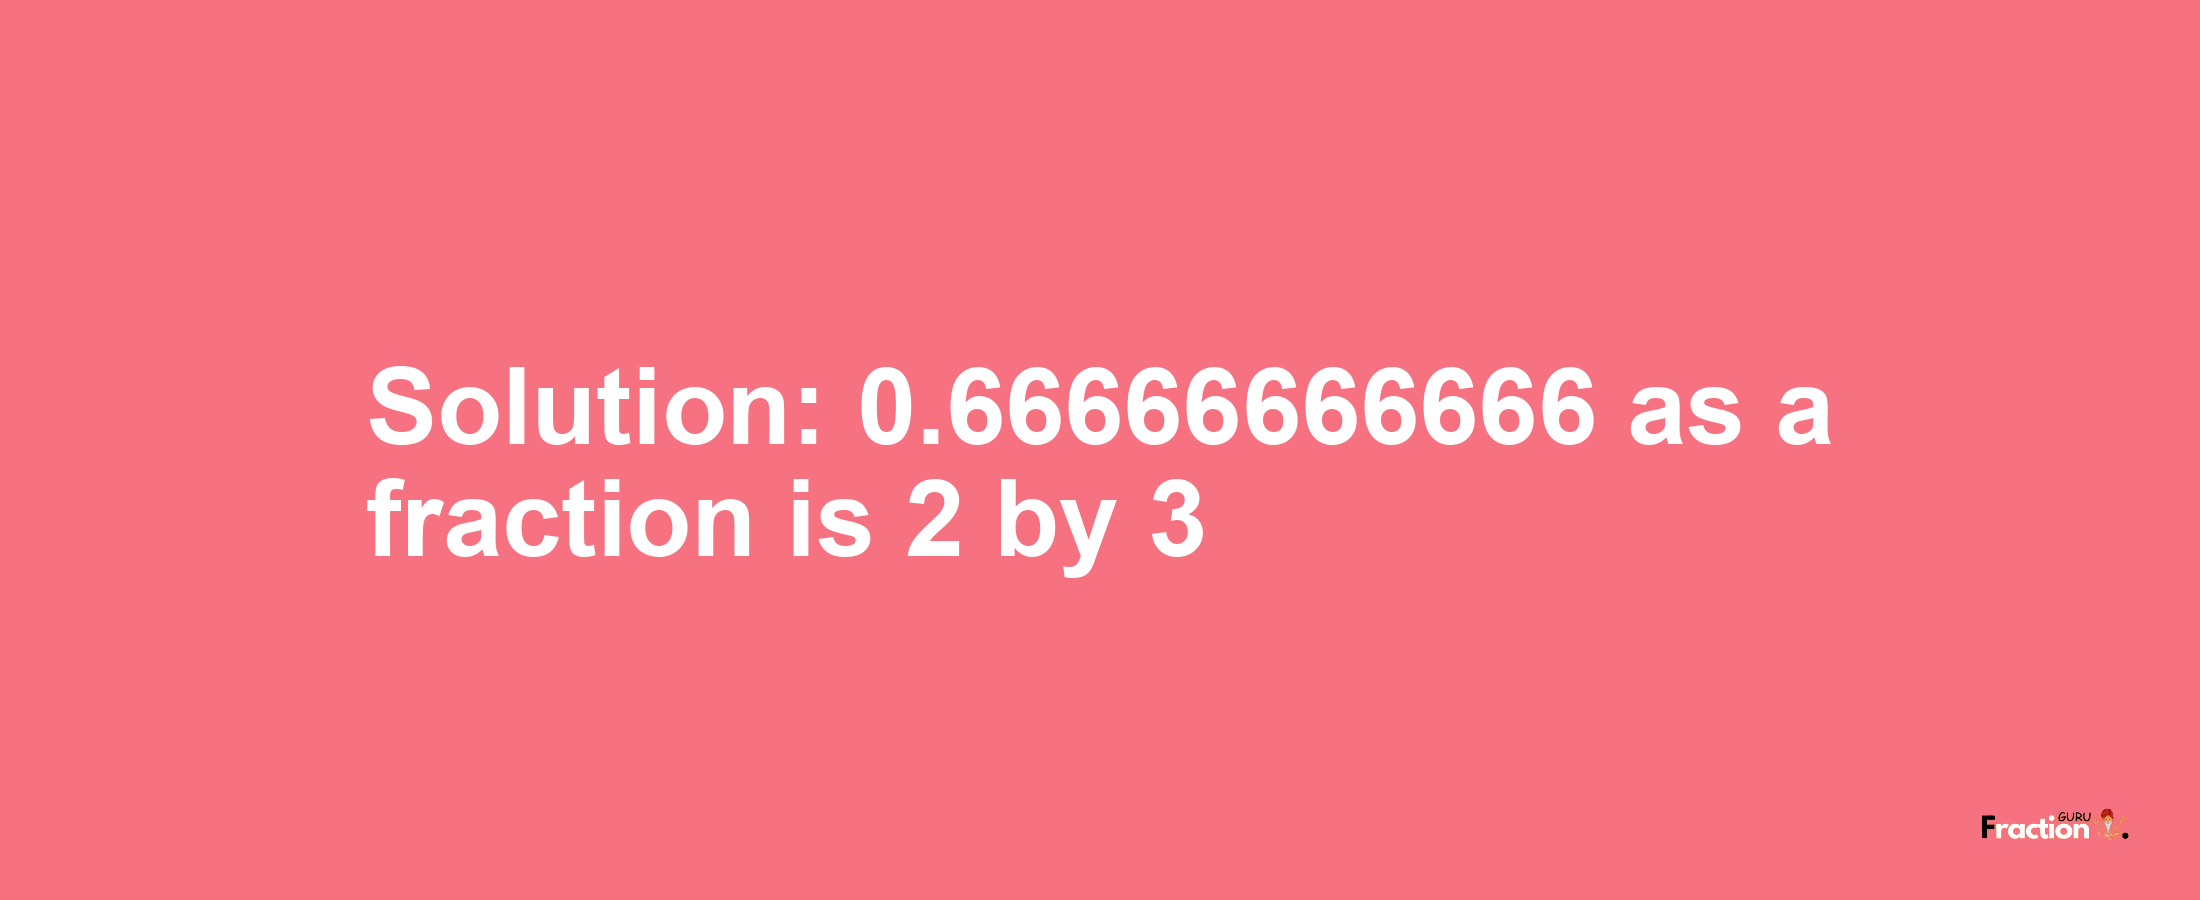 Solution:0.66666666666 as a fraction is 2/3